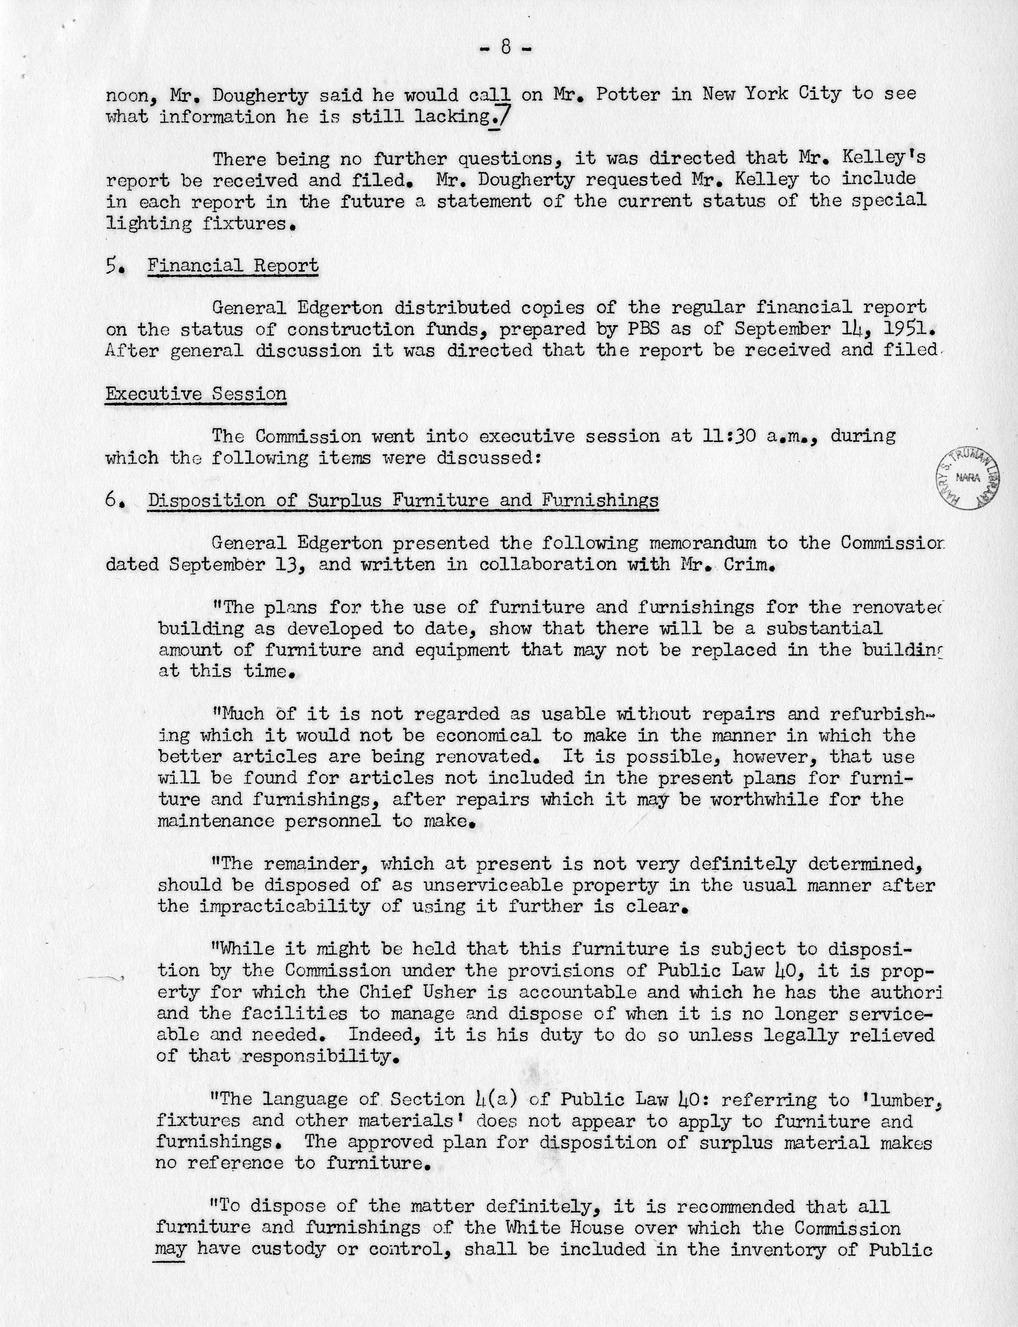 Minutes of the Fifty-First Meeting of the Commission on Renovation of the Executive Mansion